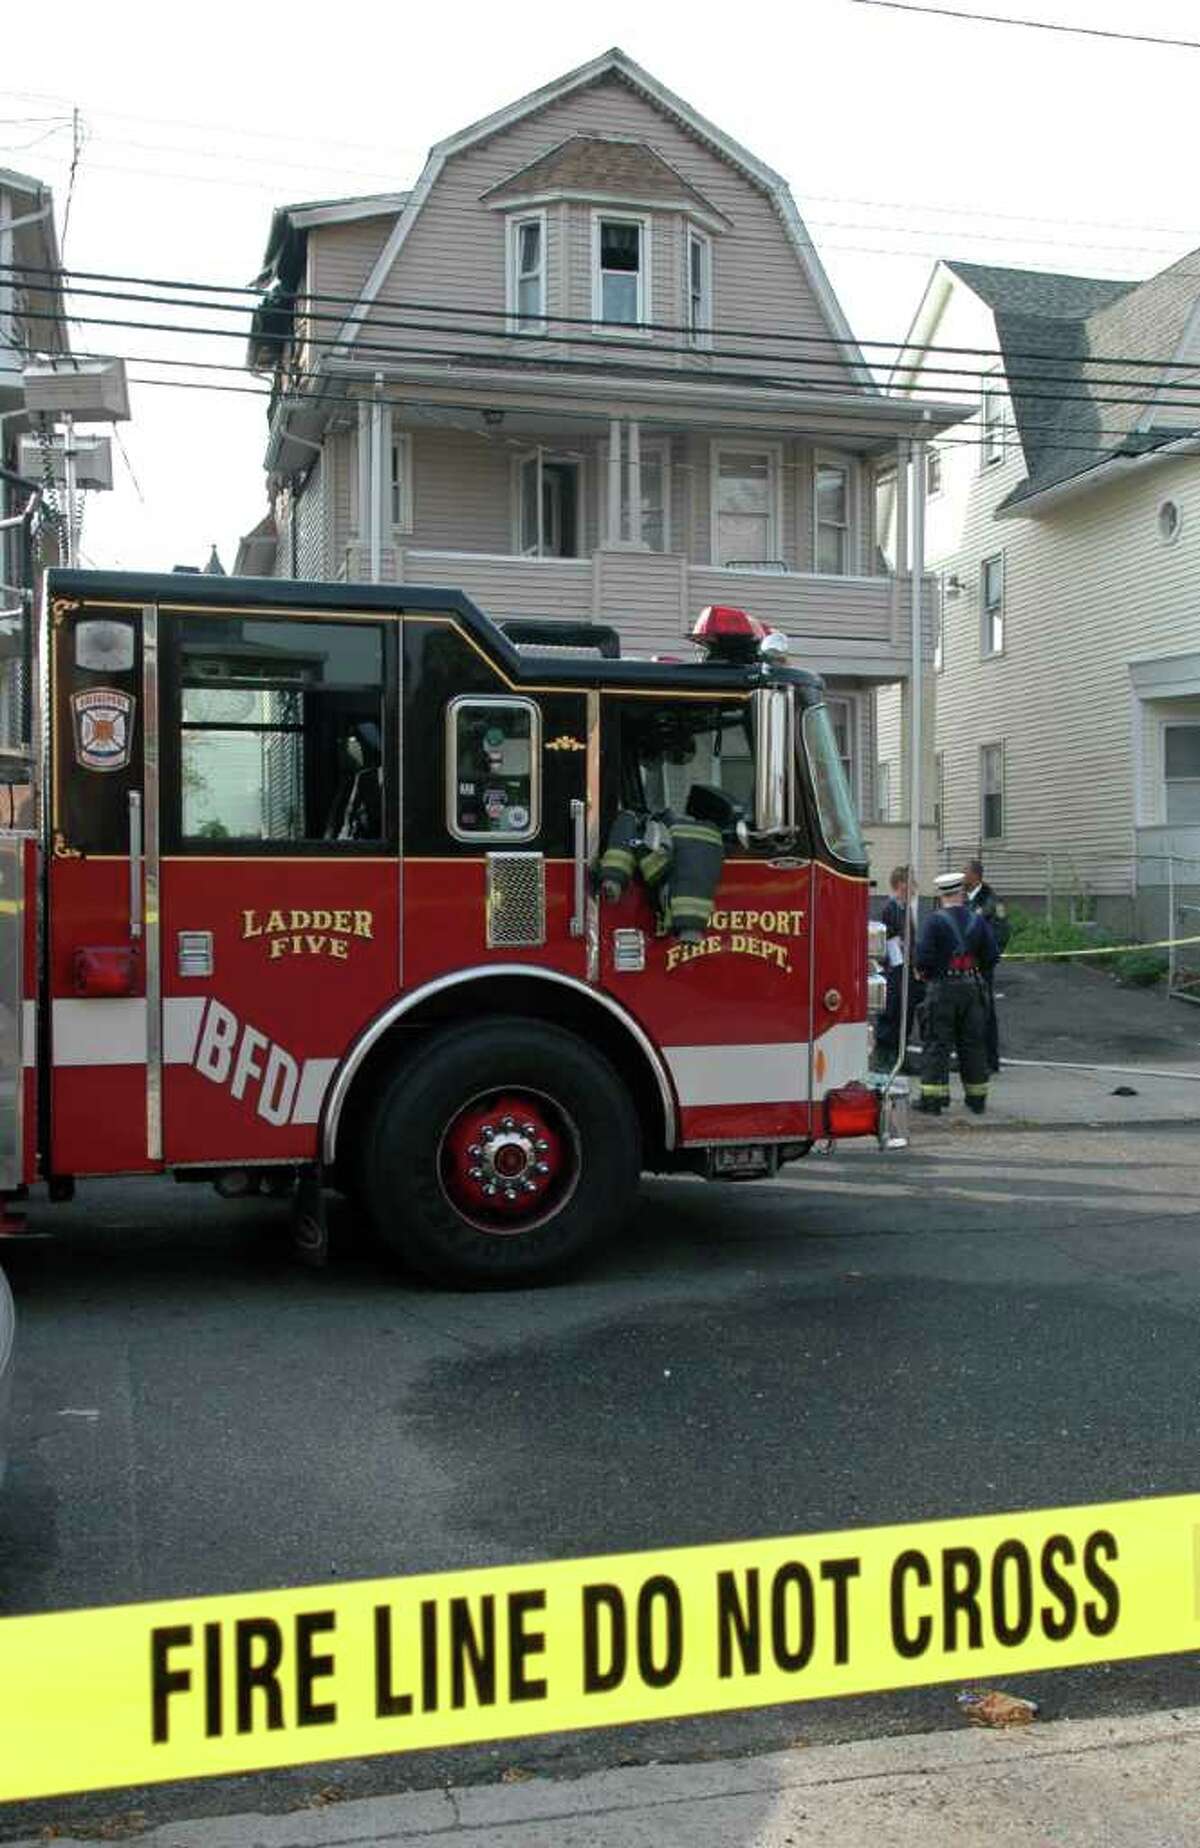 A 7-year-old boy was killed in an early morning in a house fire at 81 Highland Avenue in Bridgeport, Conn. on Monday Oct. 24, 2011. The fire began around 5 a.m., and all those in the house were sleeping at the time, and were awakened by the blaze according to Assistant Chief Dominick Carfi. The boy, who was not immediately identified, was trapped in a third-floor room engulfed by flames, firefighters said.